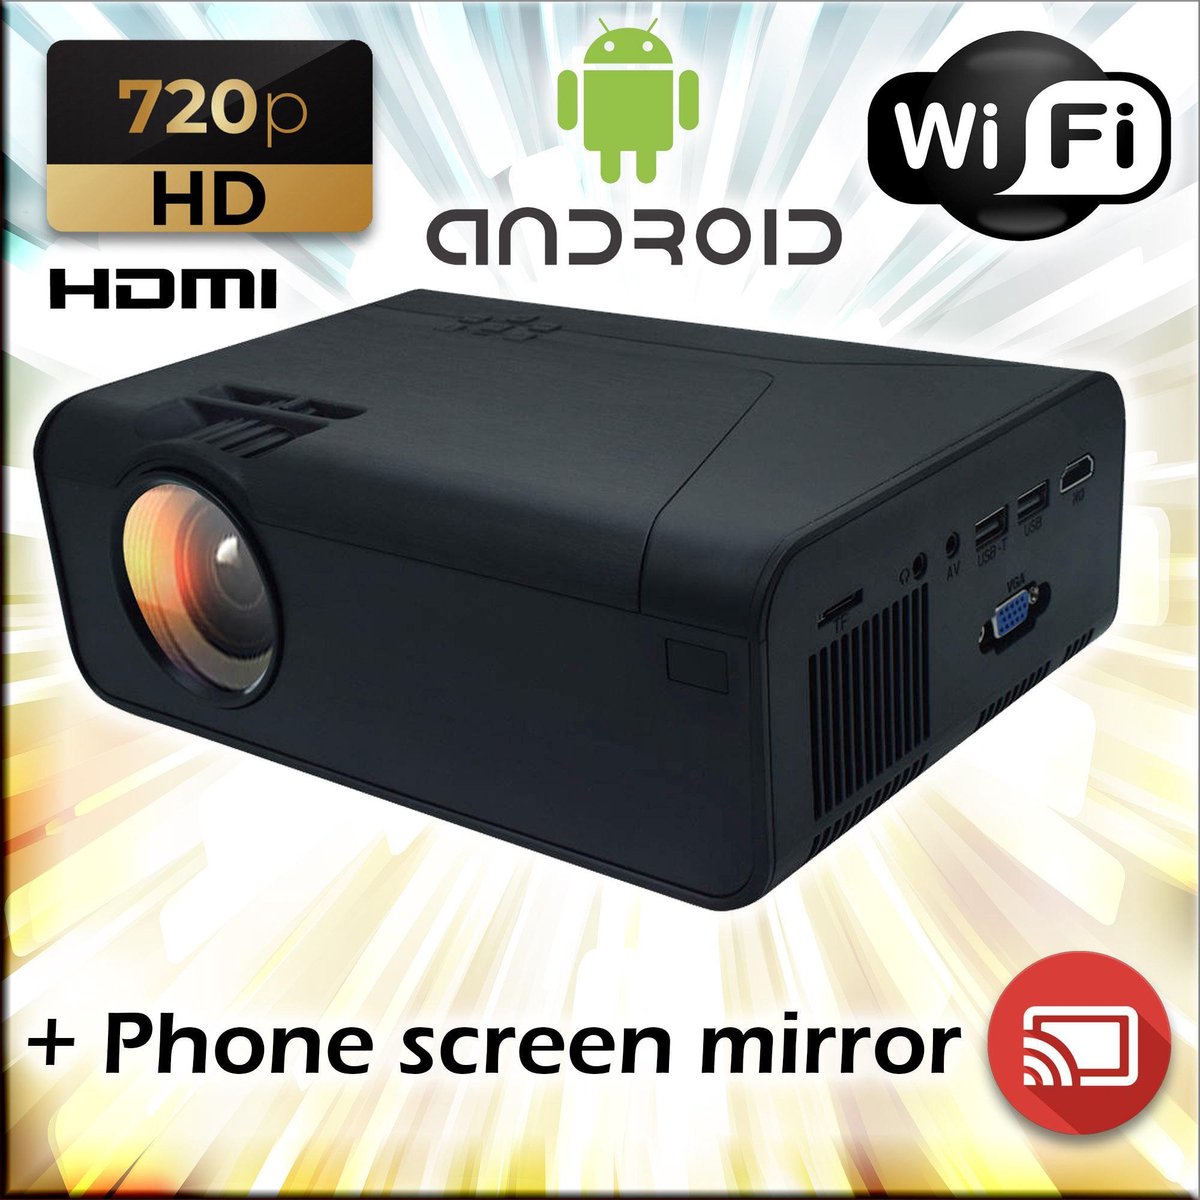 Mini beamer / projector - 720p HD - Android 6.0 + WiFi / Netflix / Youtube (Android) - AN